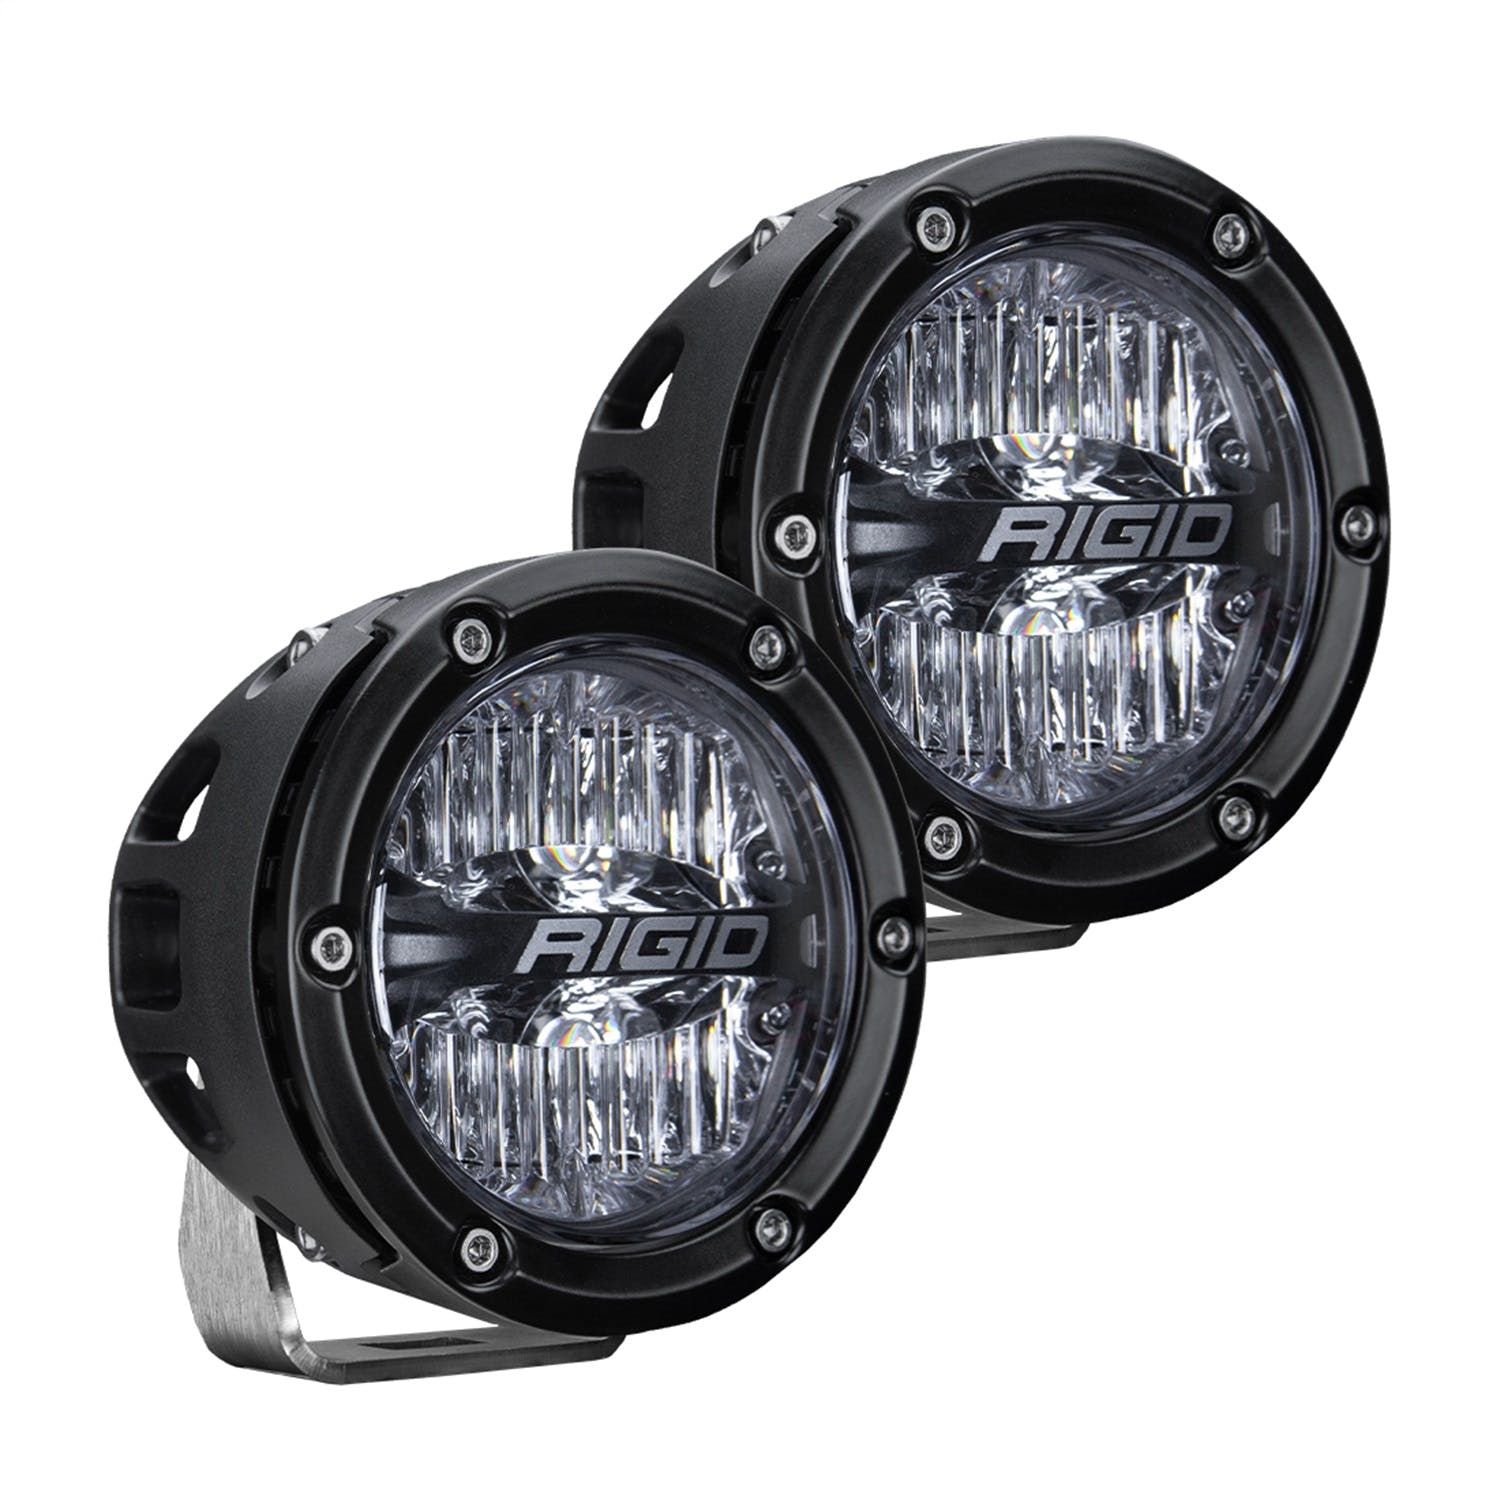 RIGID Industries 36118 360-Series 4in LED Off-Road Drive Beam Amber Backlight Pair